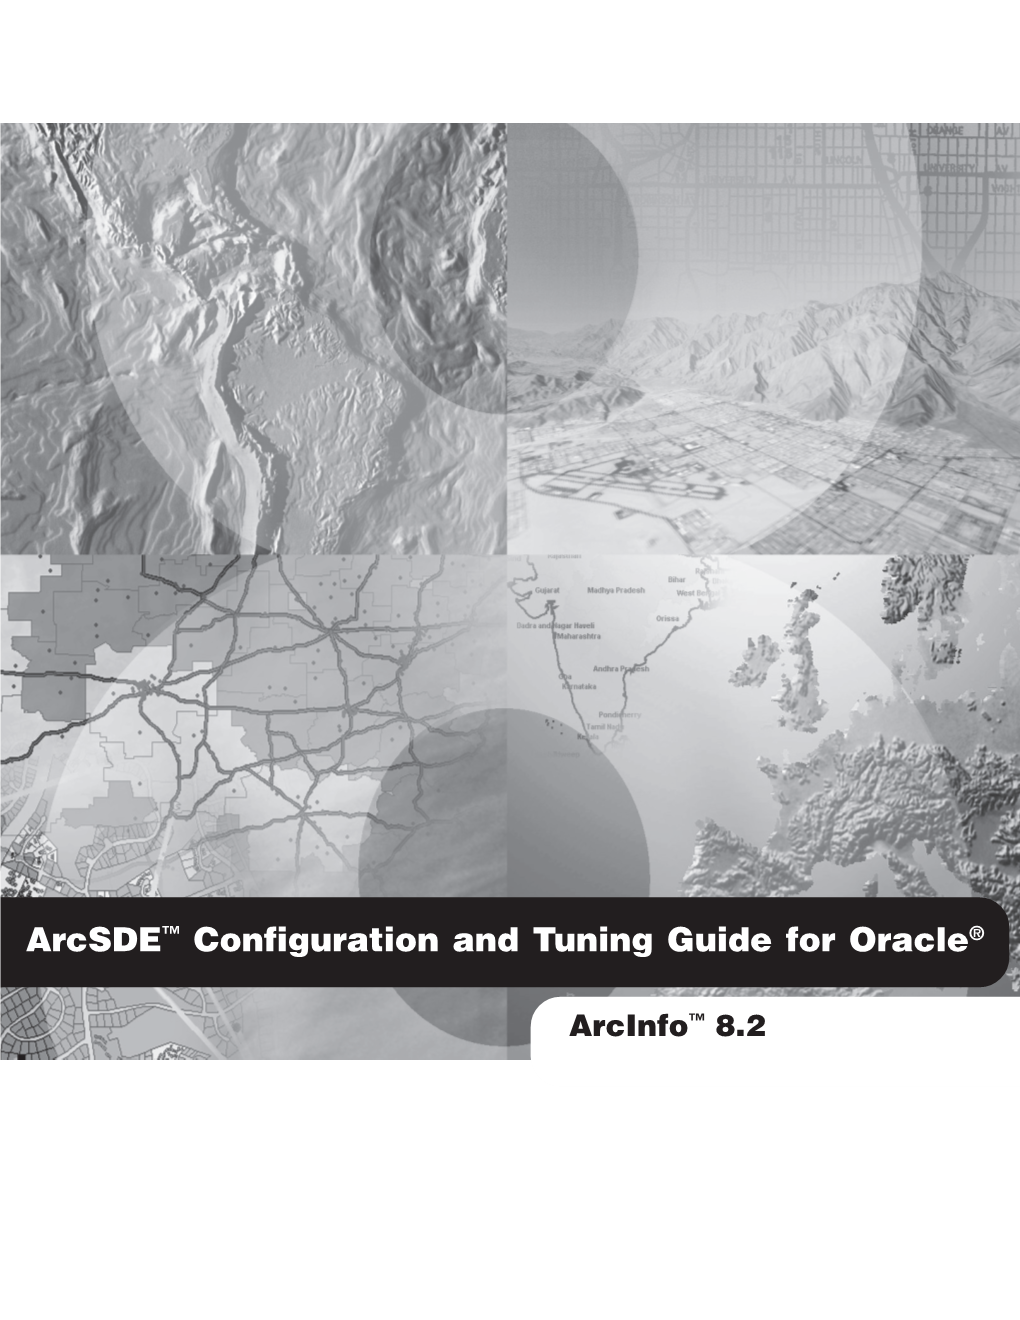 Arcsde™ Configuration and Tuning Guide for Oracle®